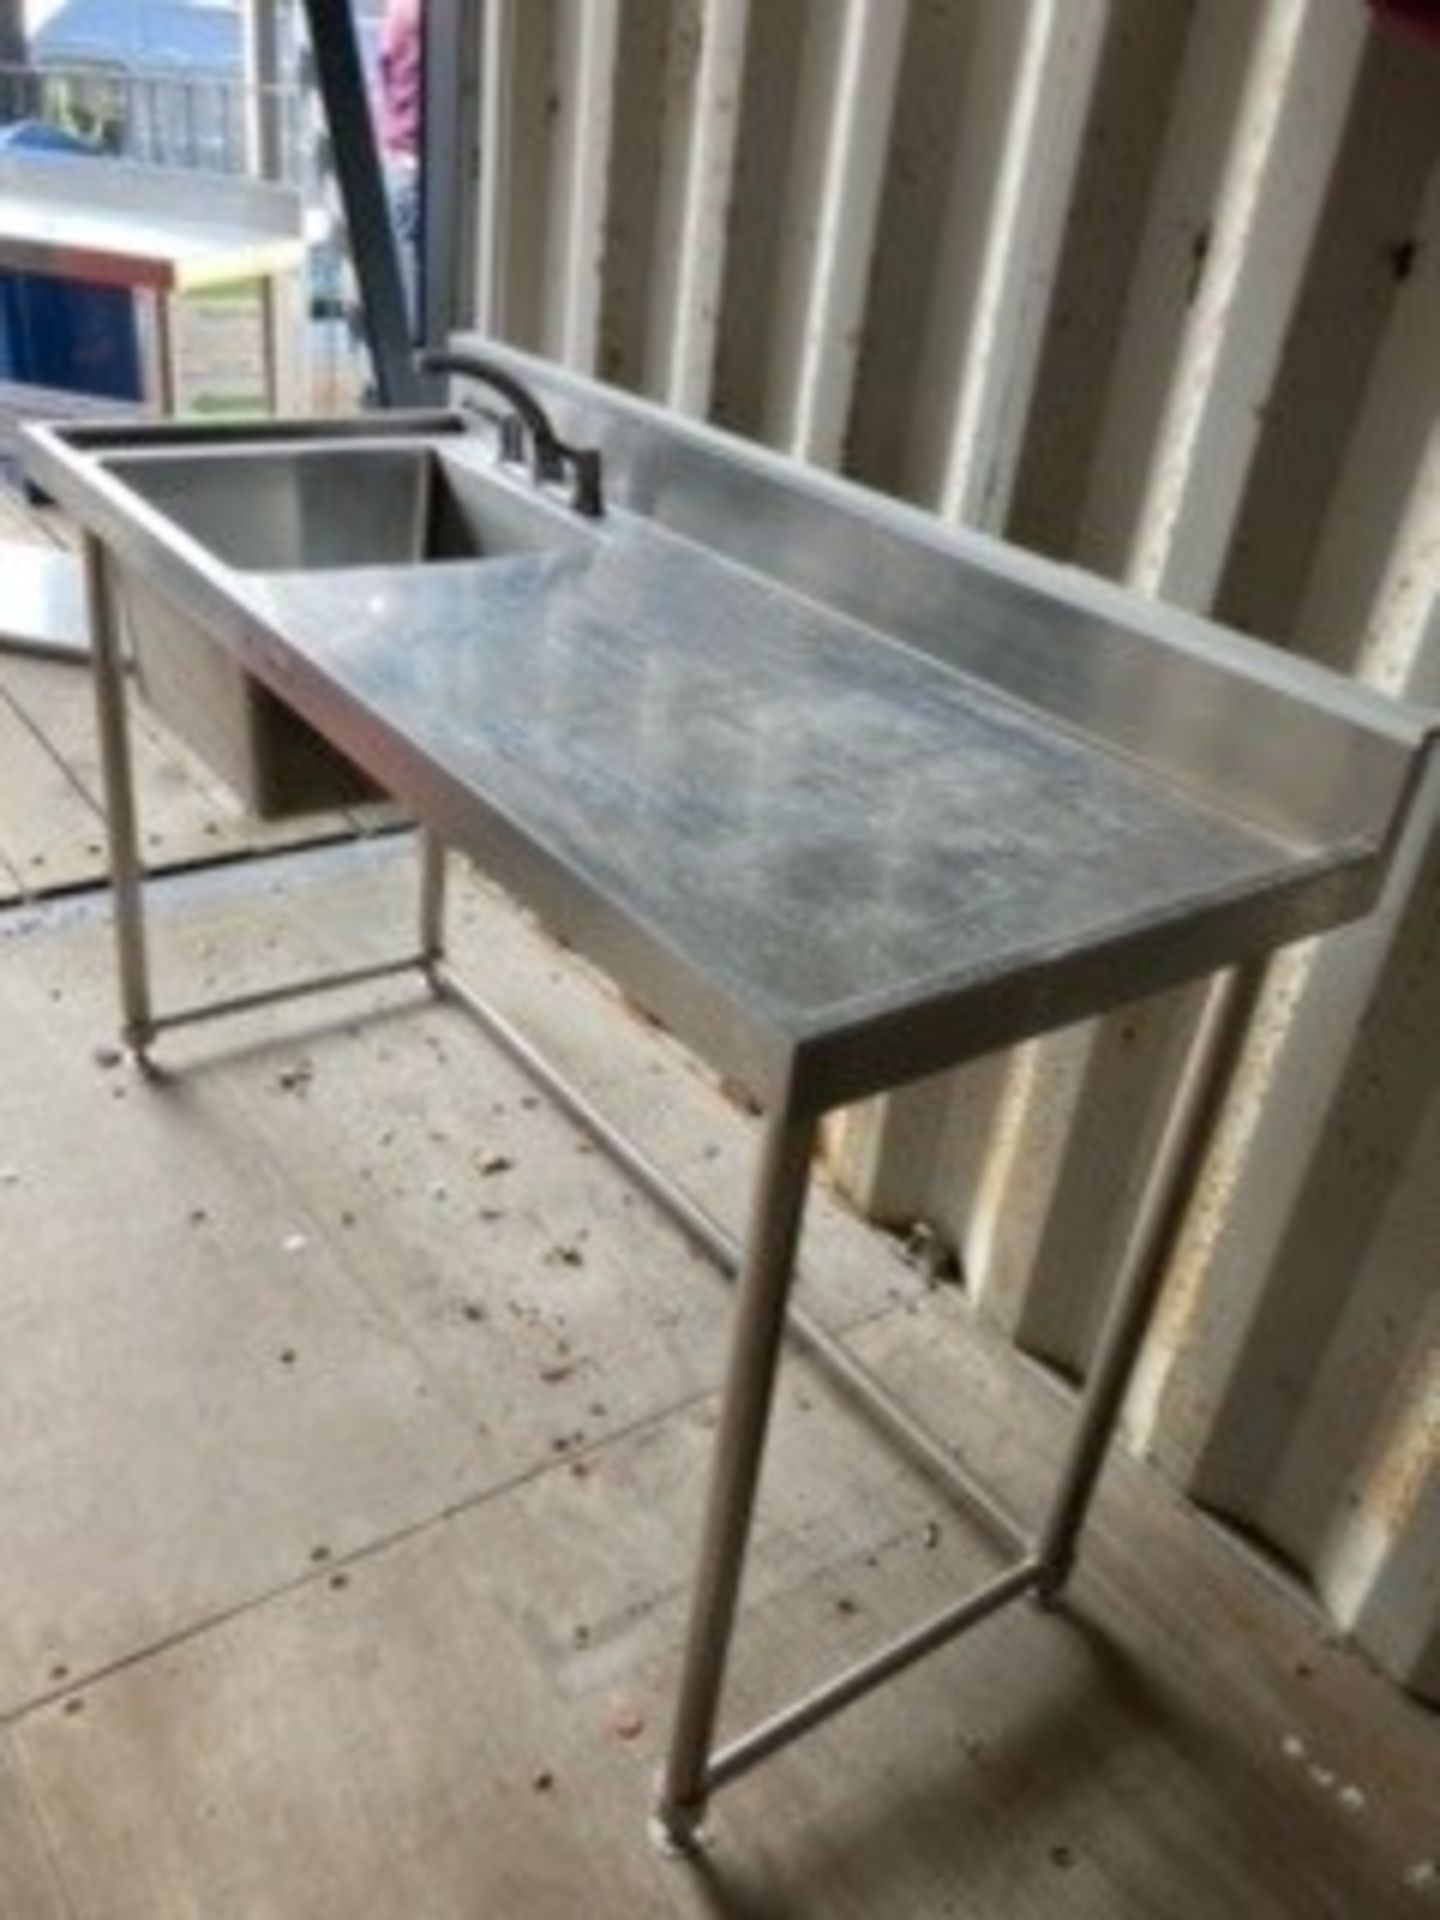 Simply Stainless Steel Sink Unit - Image 4 of 5